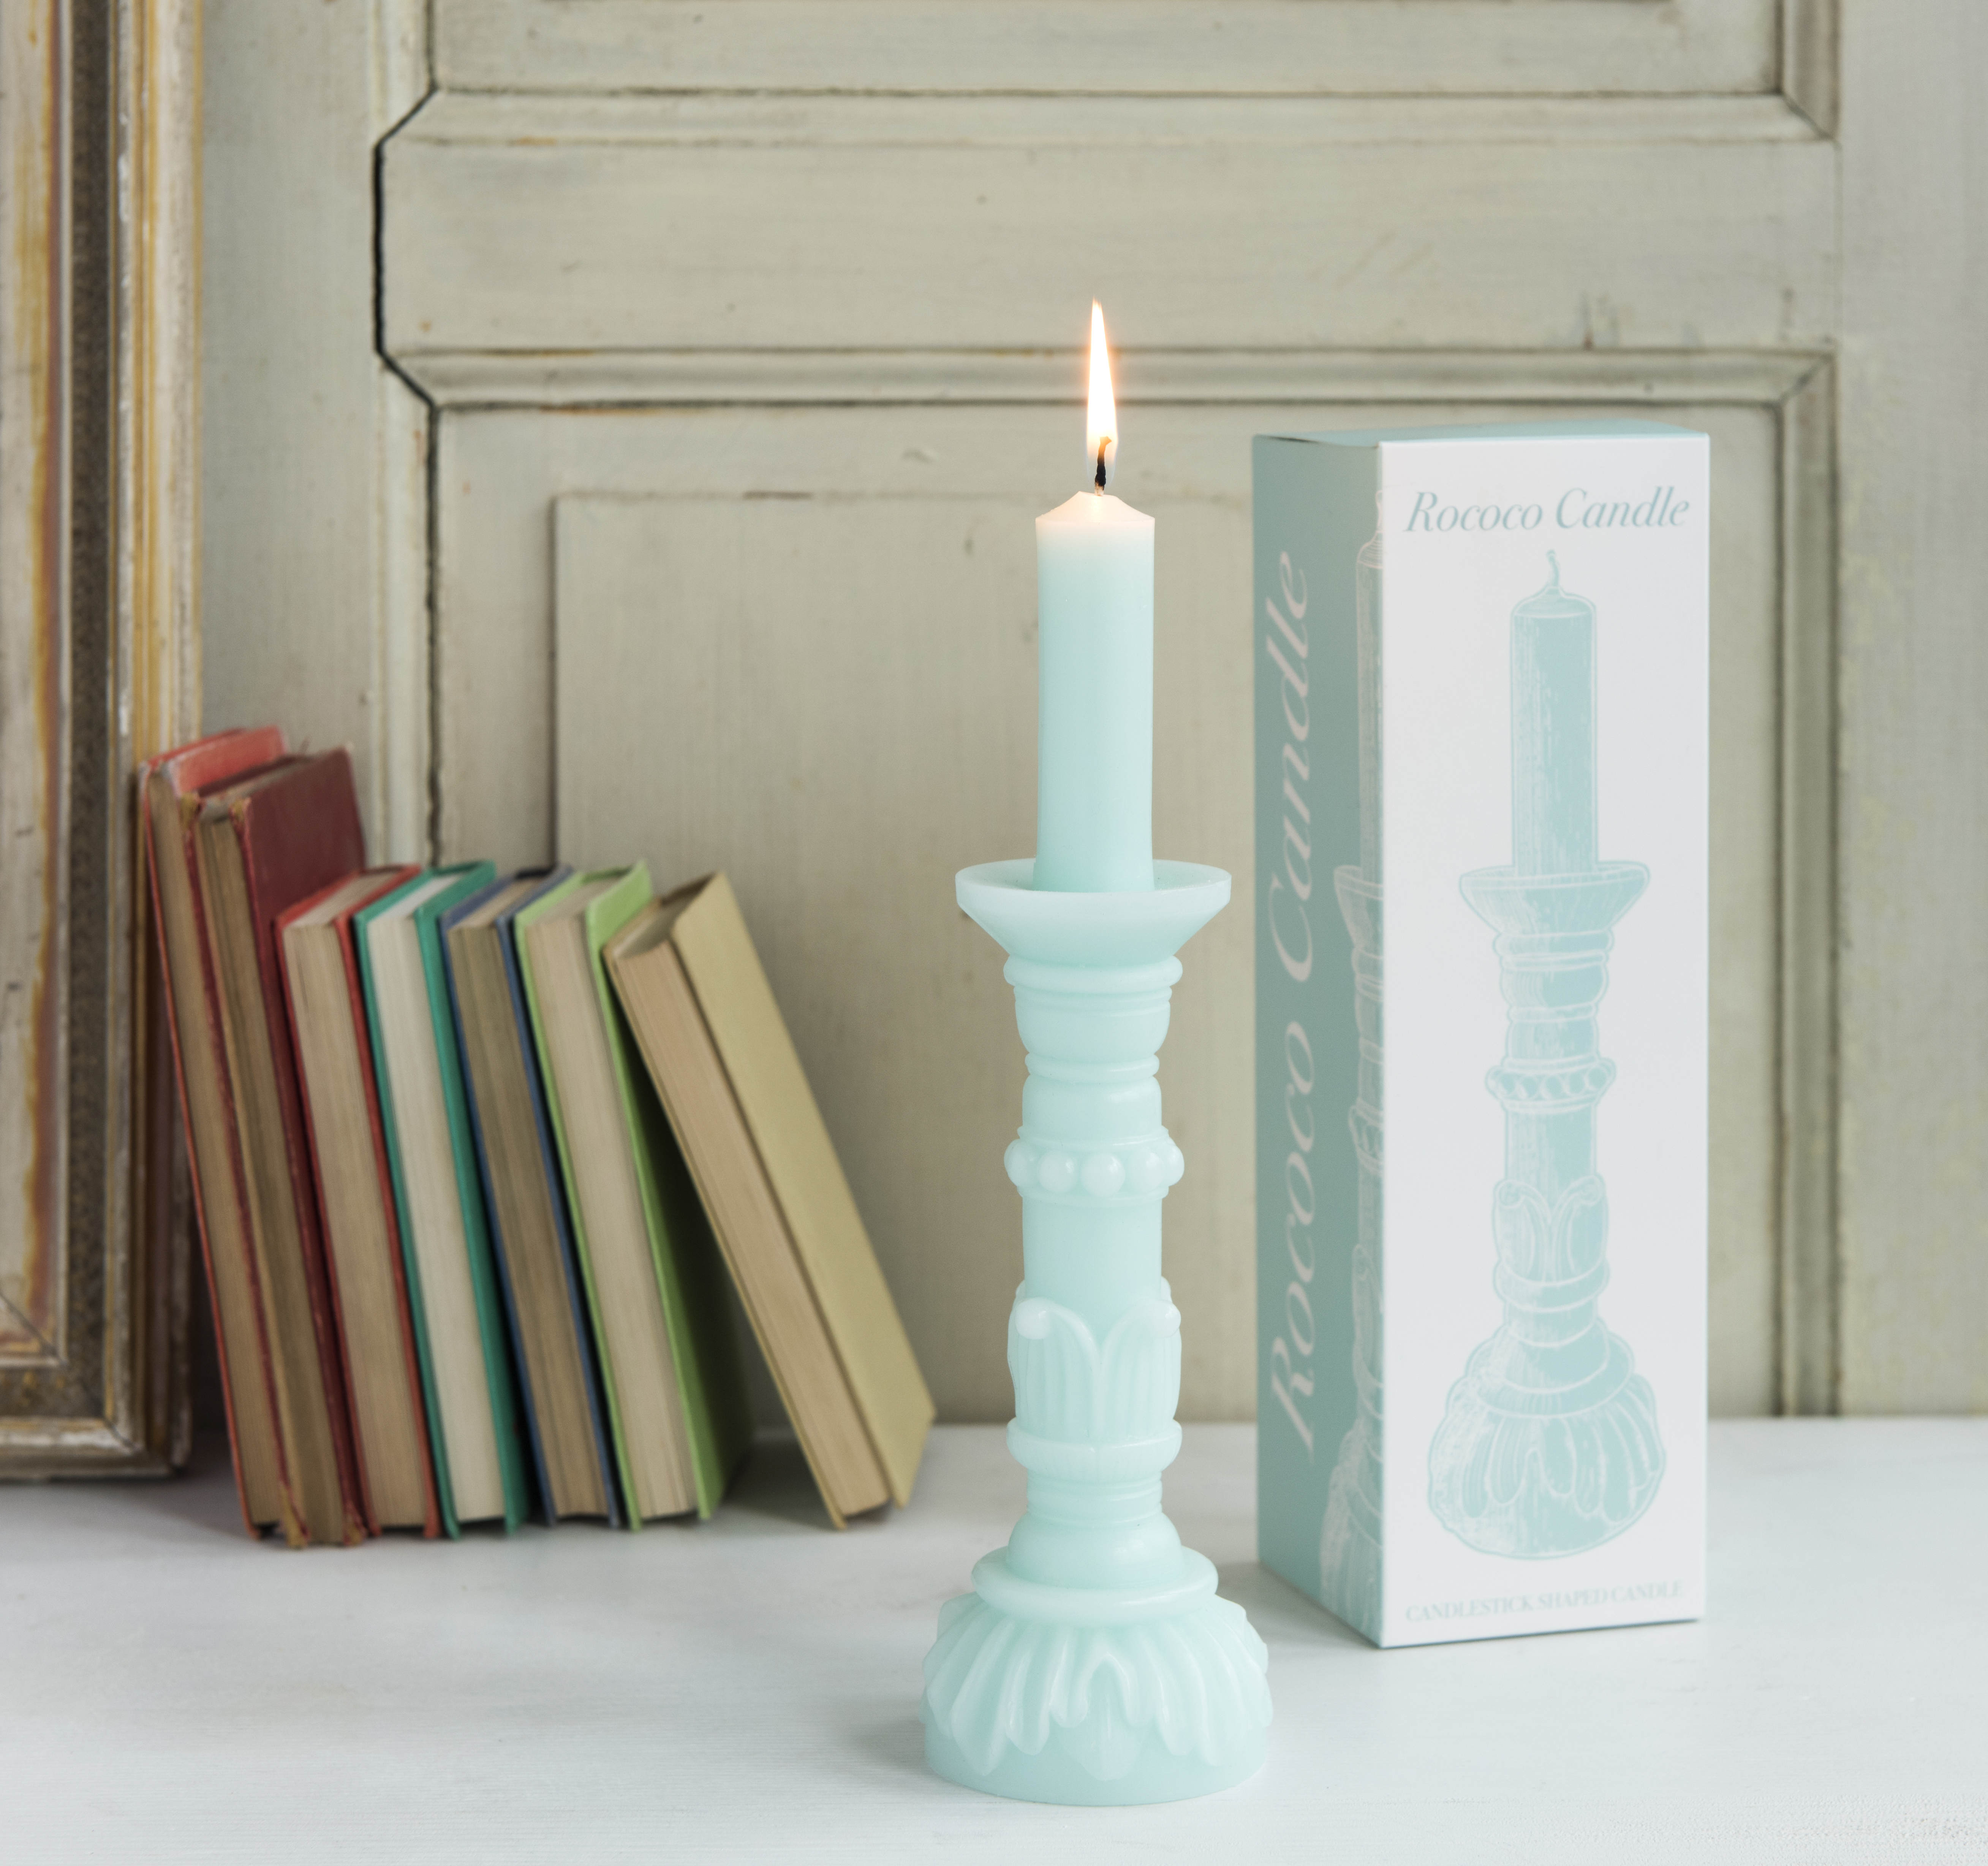 Mint green Rococo candle stick, £4.95, REX London